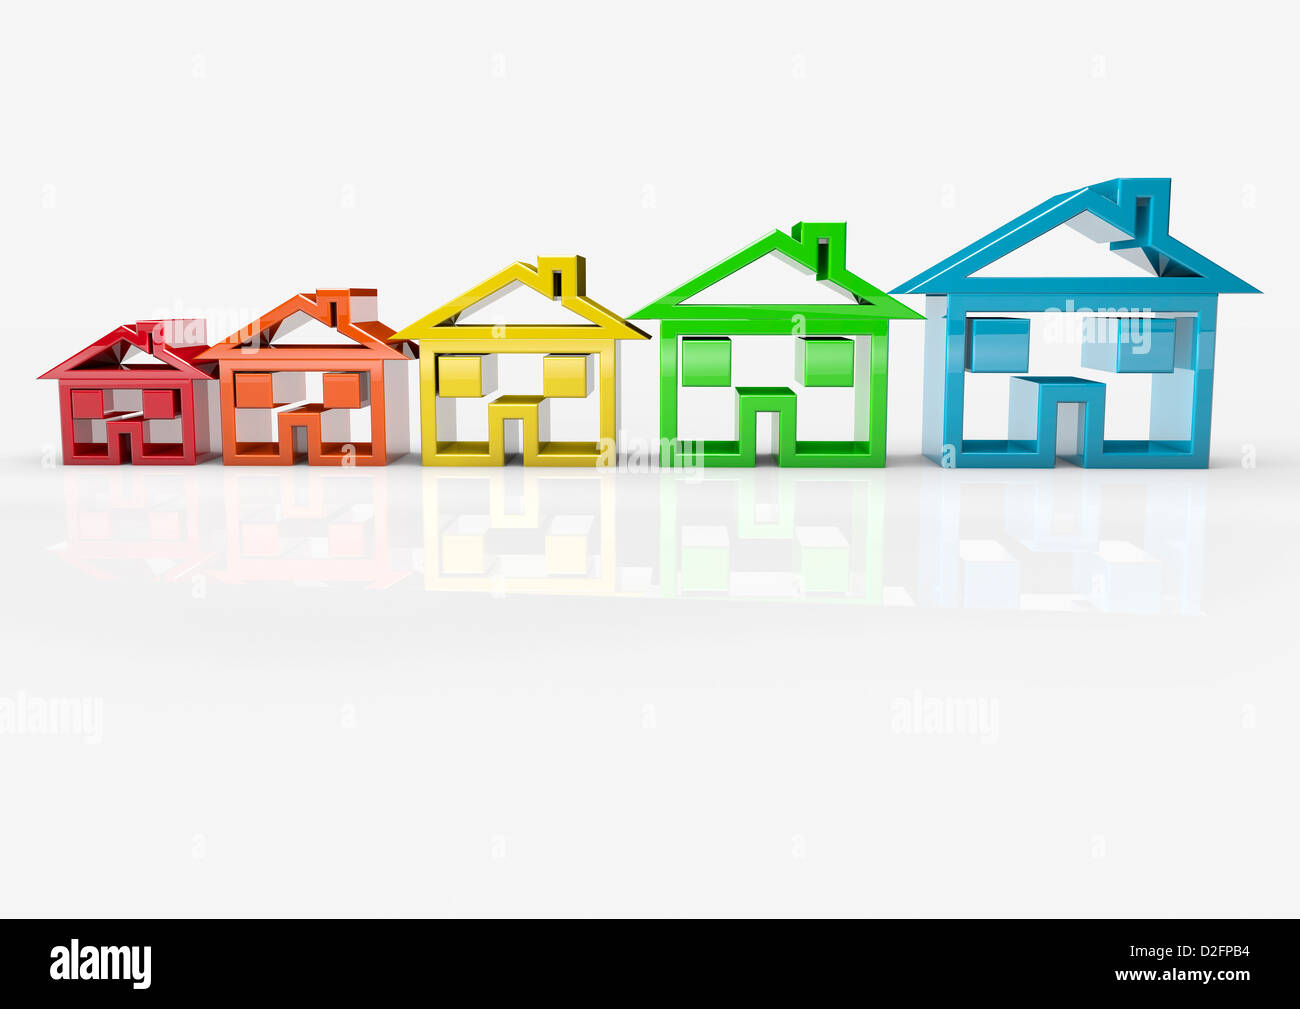 House symbols representing the property market - growth / relocation / trading-up / moving home / energy efficiency concept Stock Photo